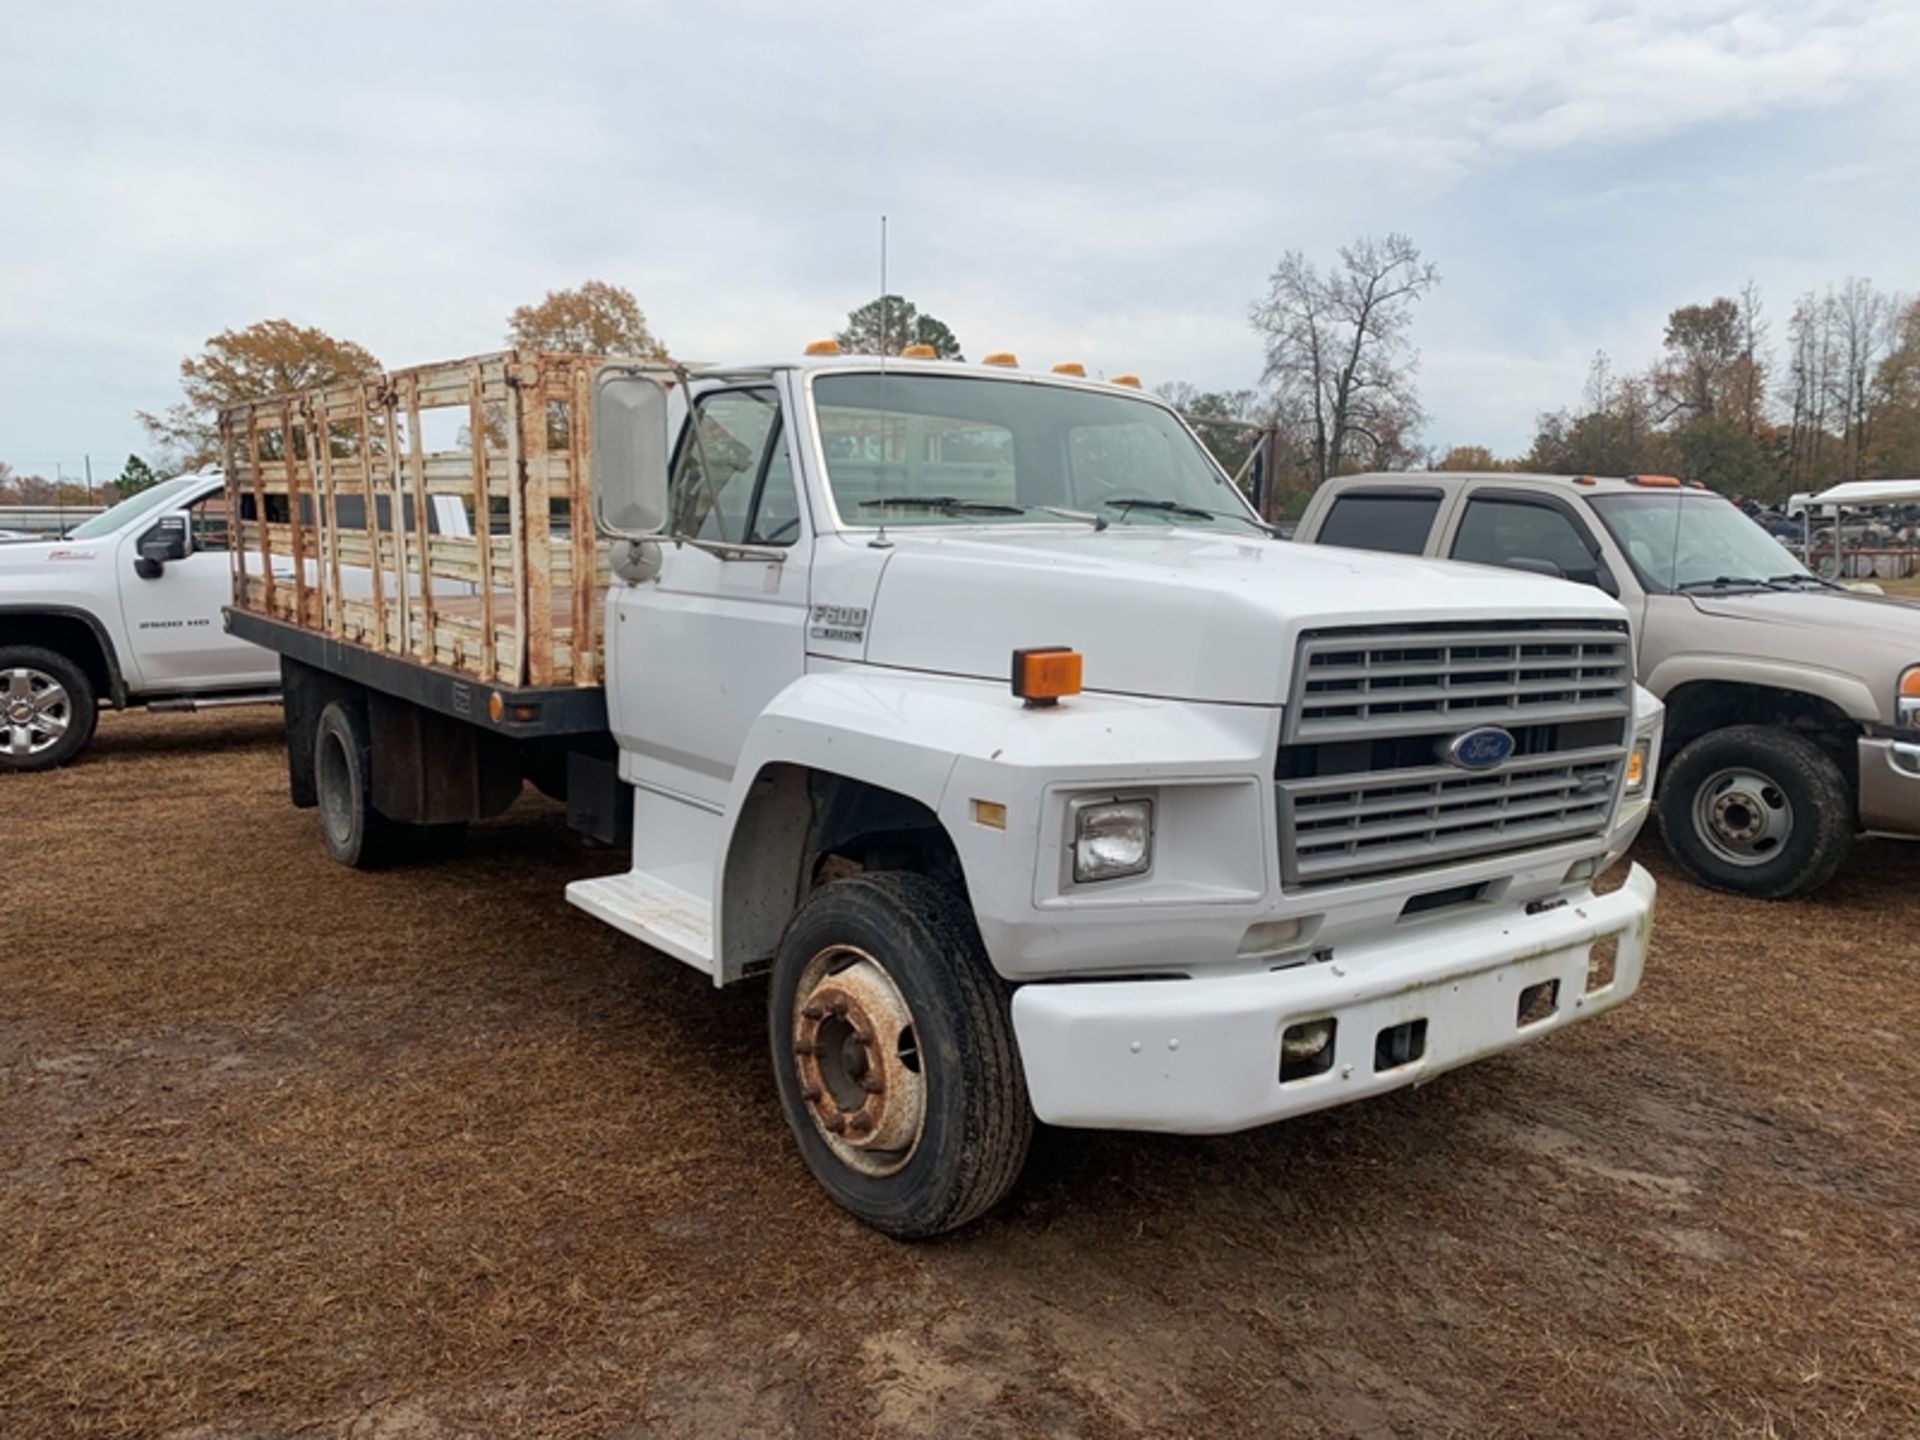 1991 Ford F600 dsl flat bed - Image 2 of 5